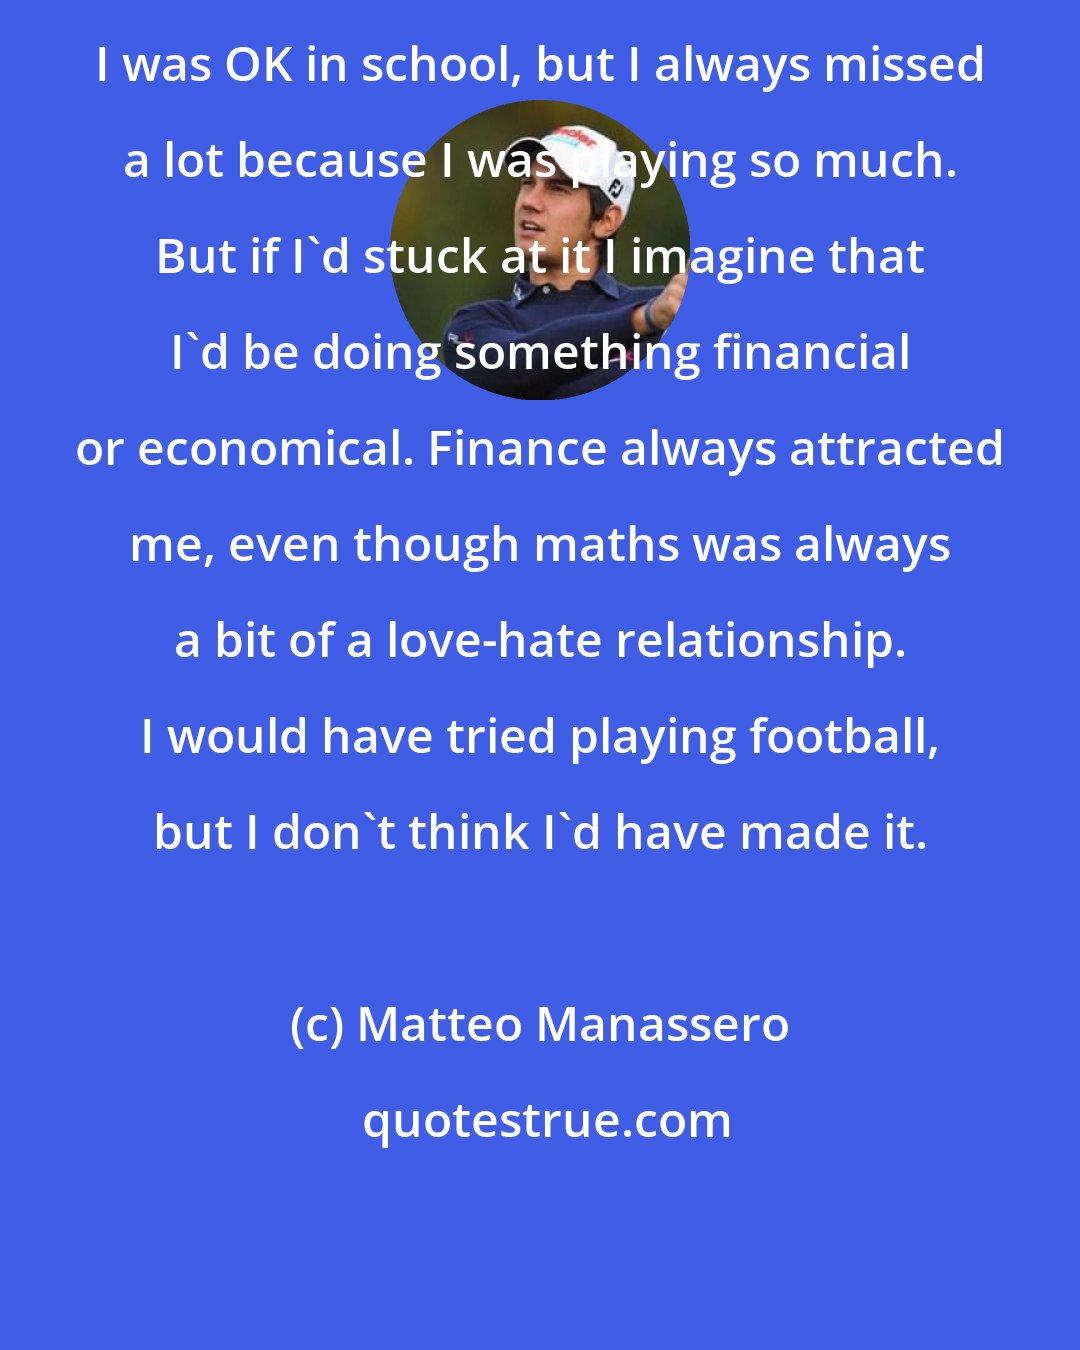 Matteo Manassero: I was OK in school, but I always missed a lot because I was playing so much. But if I'd stuck at it I imagine that I'd be doing something financial or economical. Finance always attracted me, even though maths was always a bit of a love-hate relationship. I would have tried playing football, but I don't think I'd have made it.